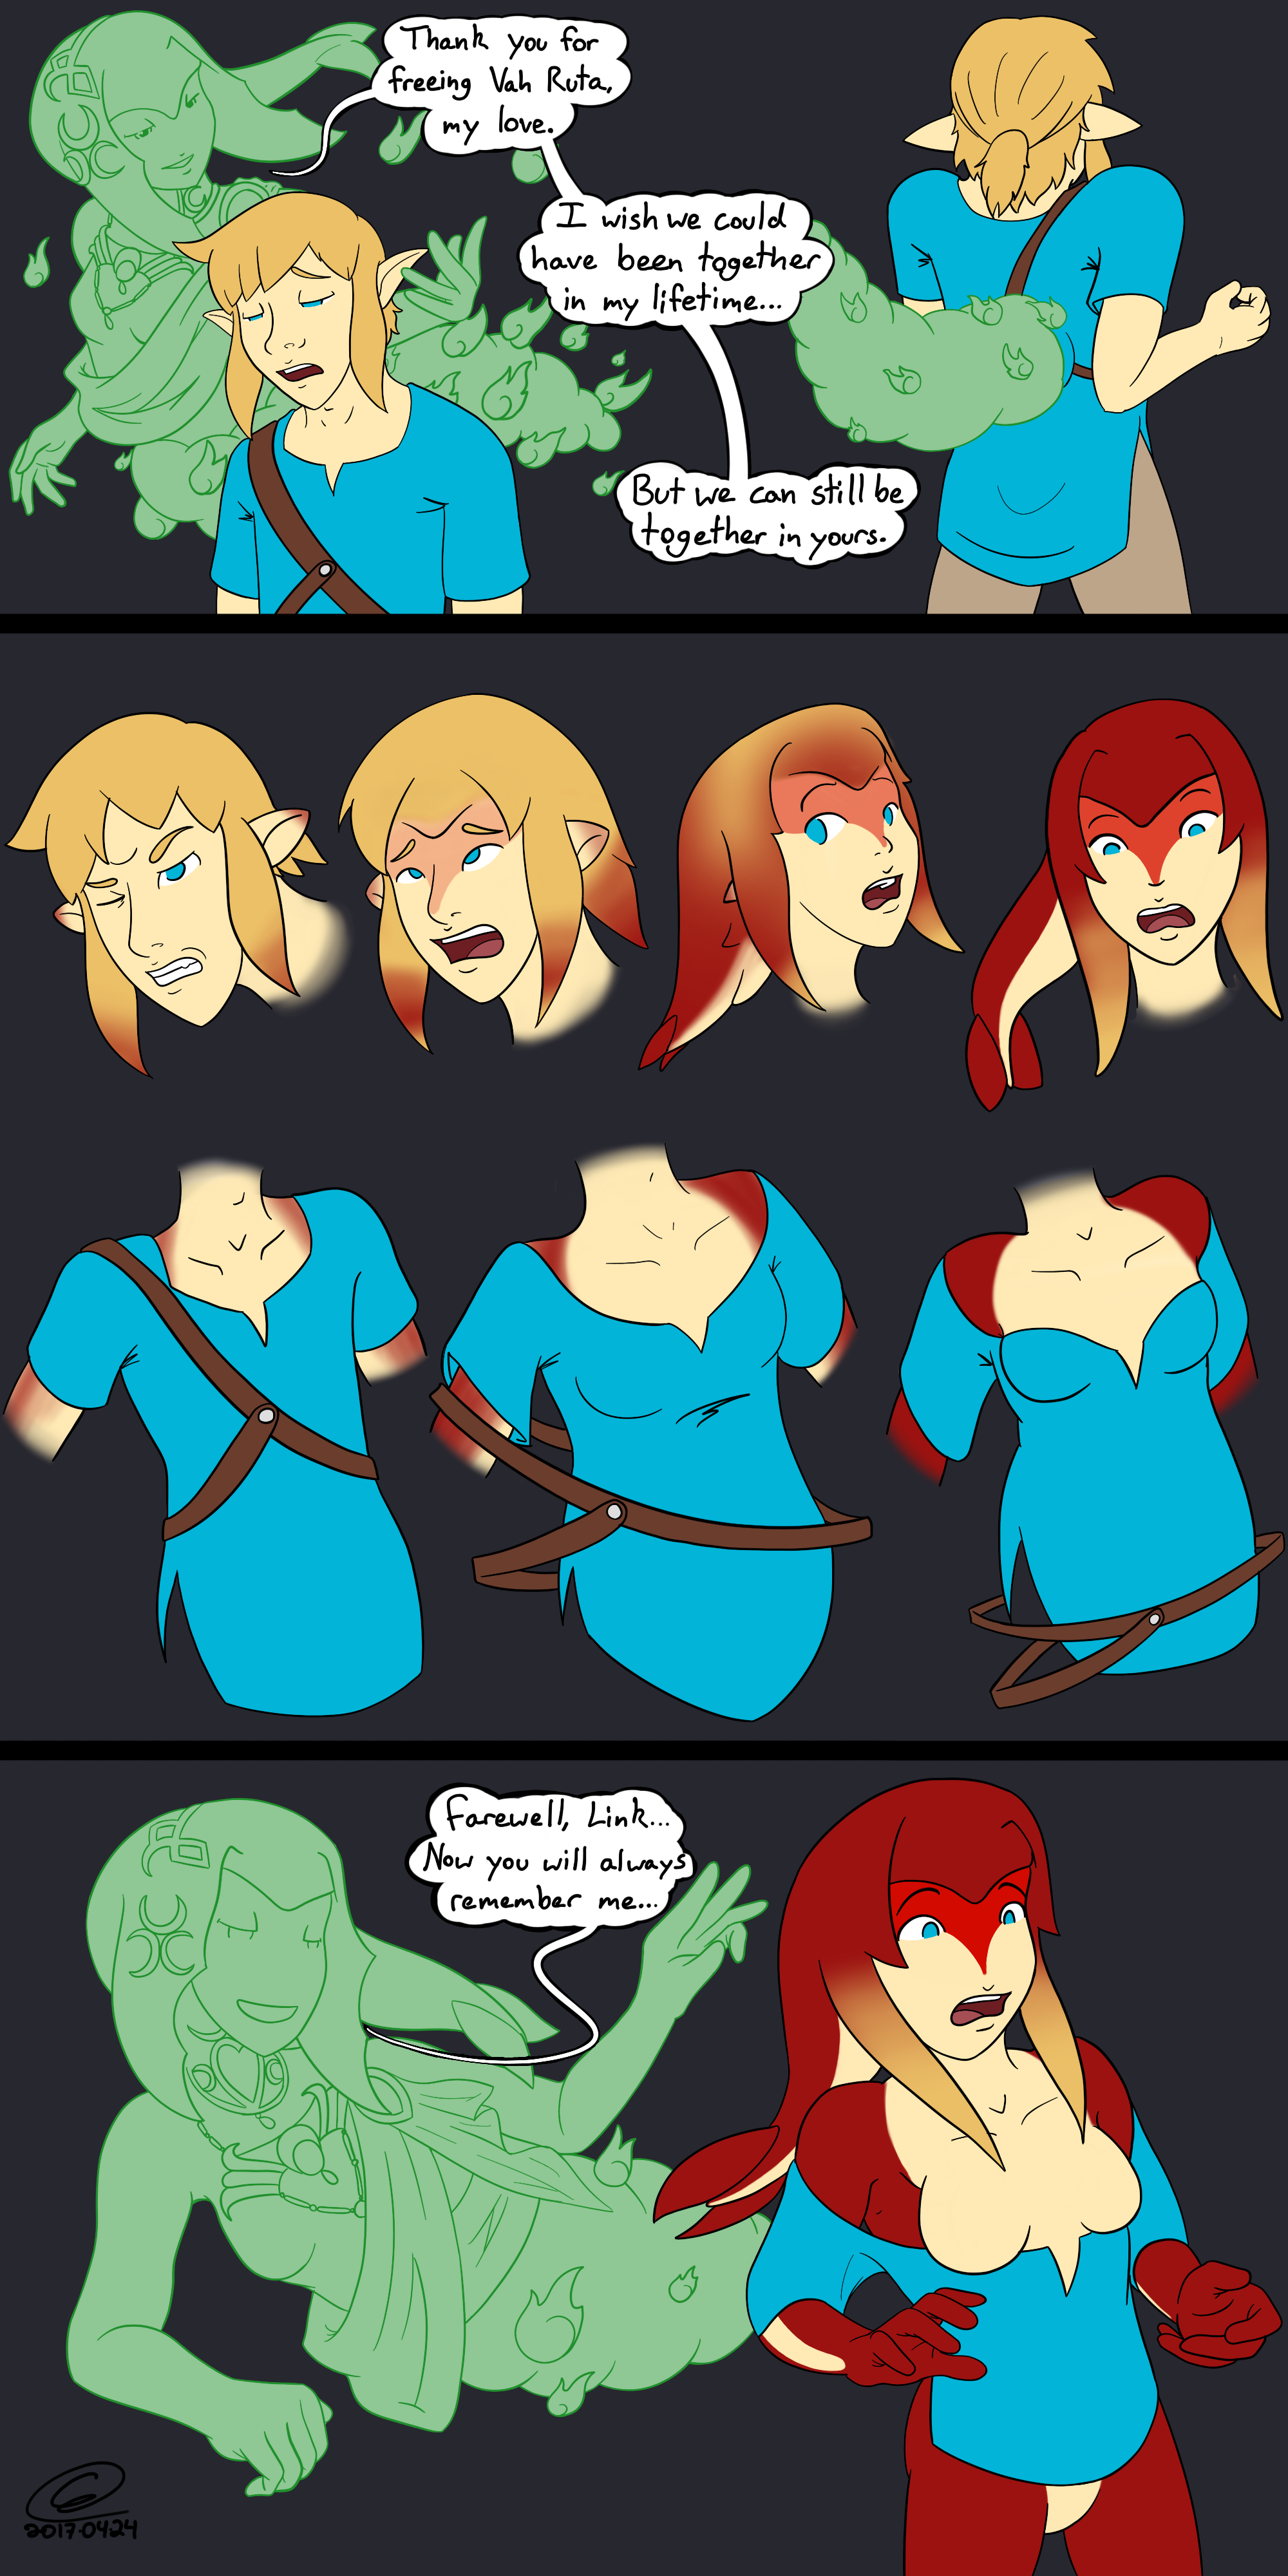 By the Grace of Mipha - Link TG/TF into Zora.